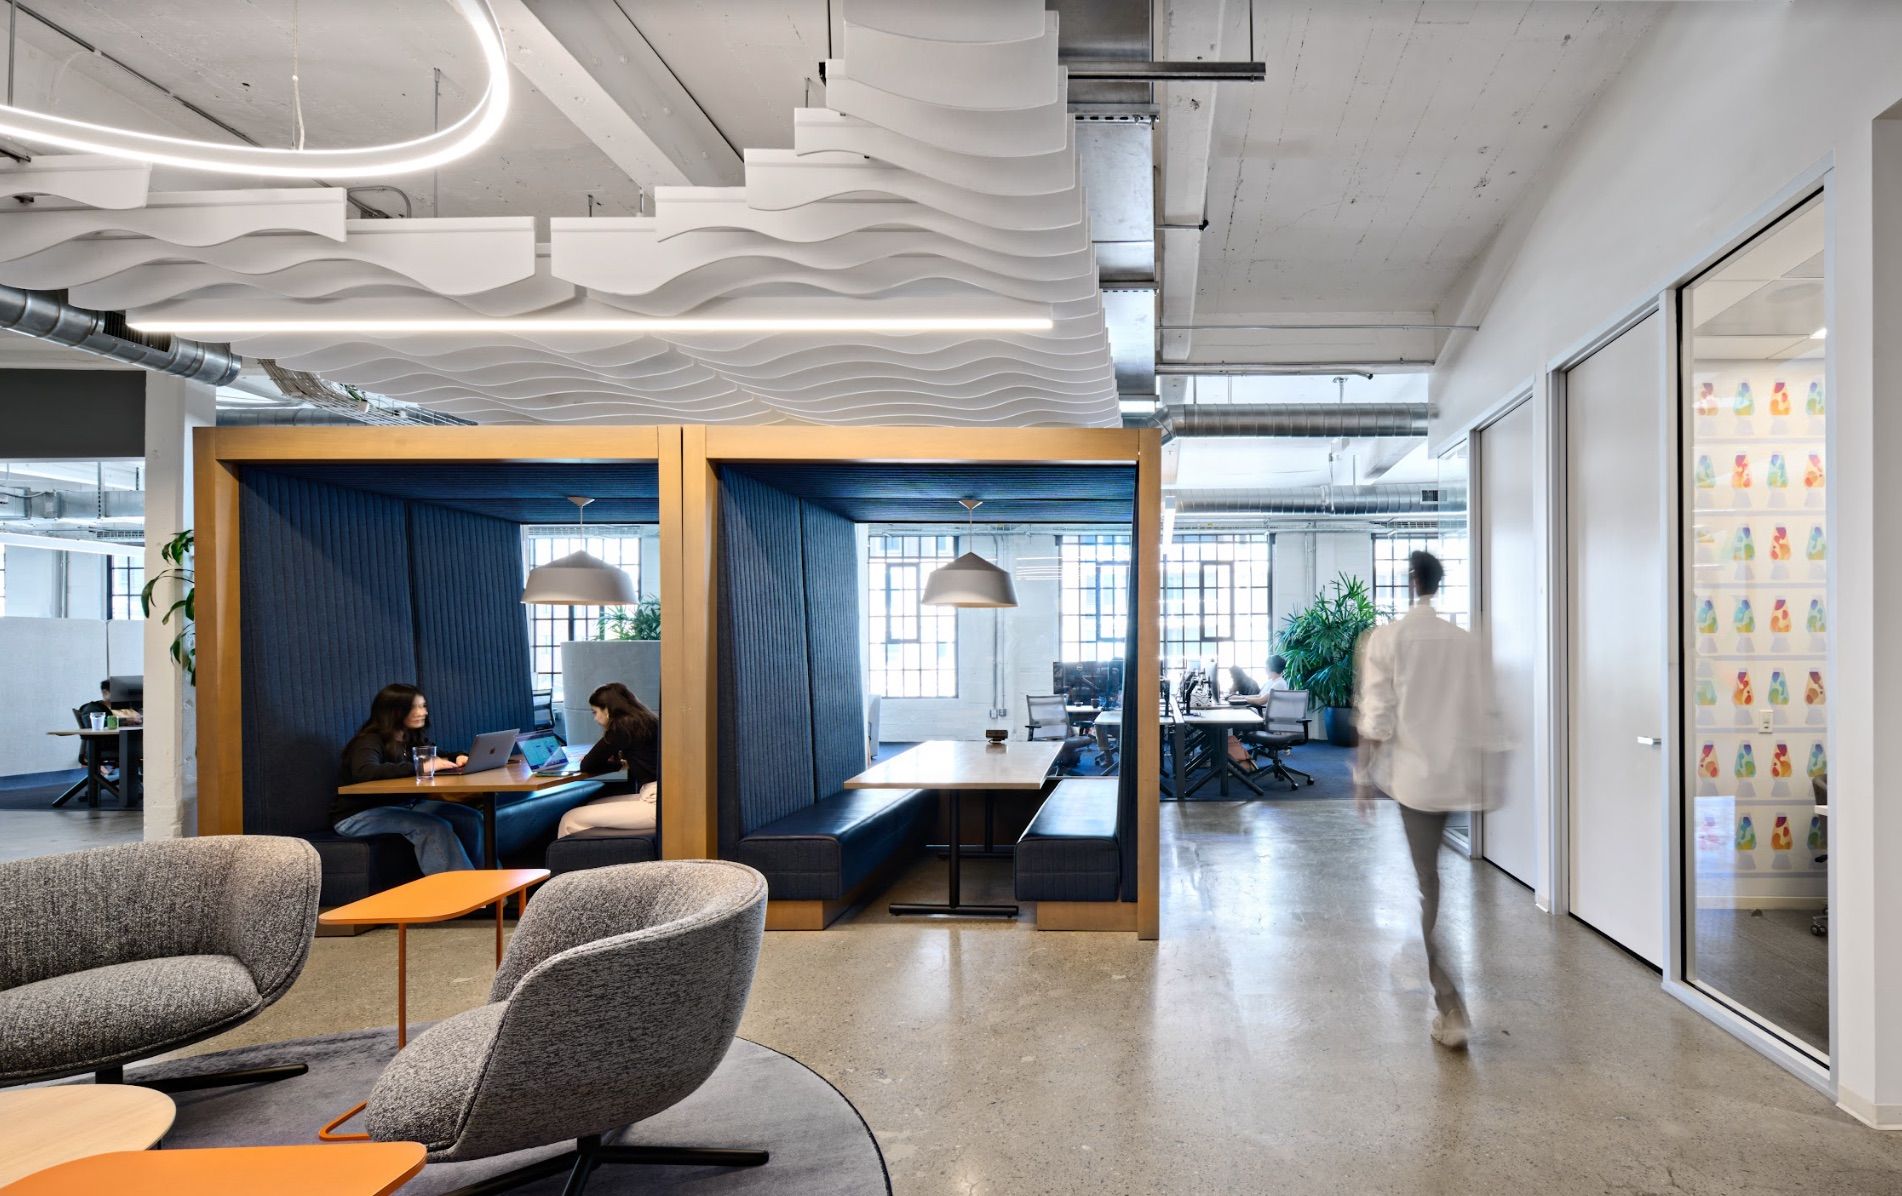 An example of sustainable acoustic baffles as seen in our San Francisco office